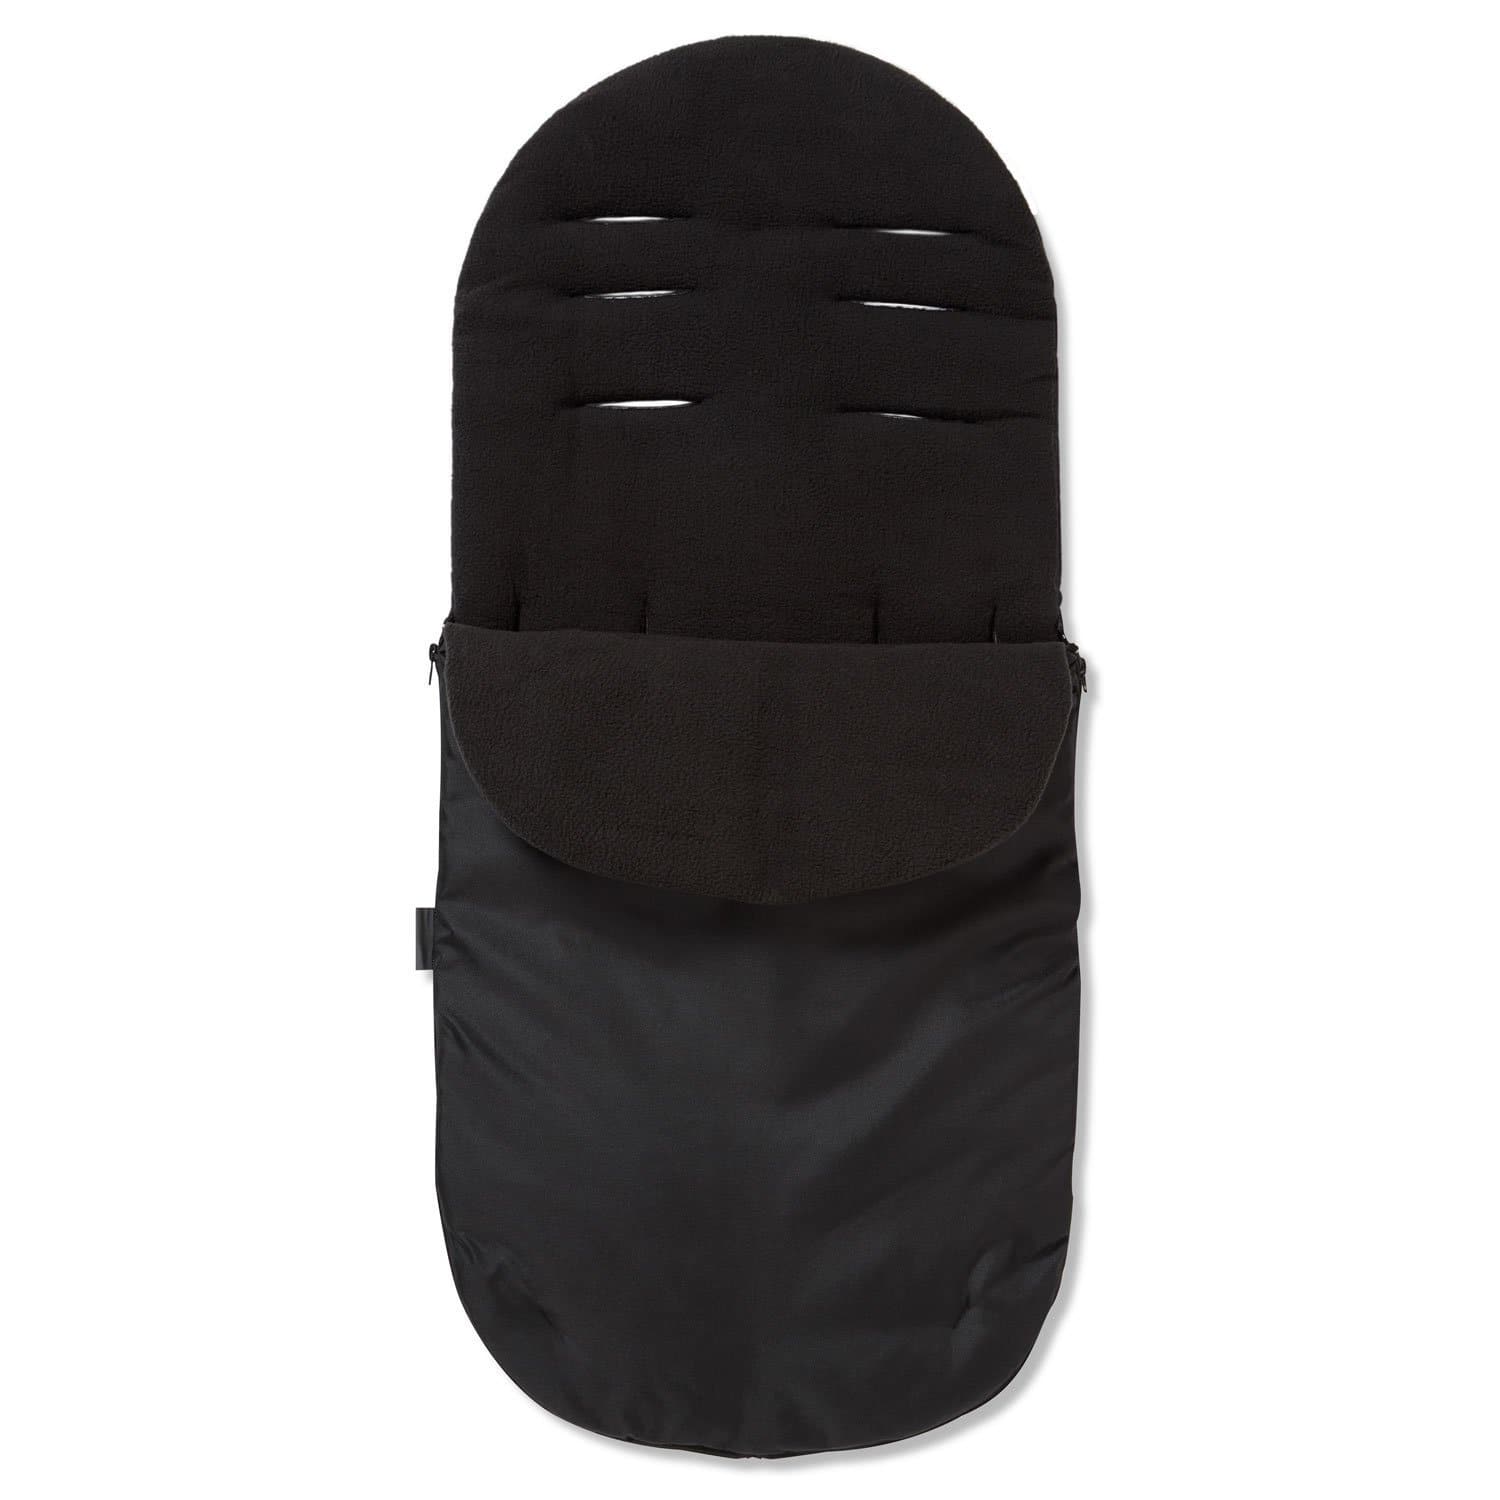 Footmuff / Cosy Toes Compatible with iCandy - Black / Fits All Models | For Your Little One